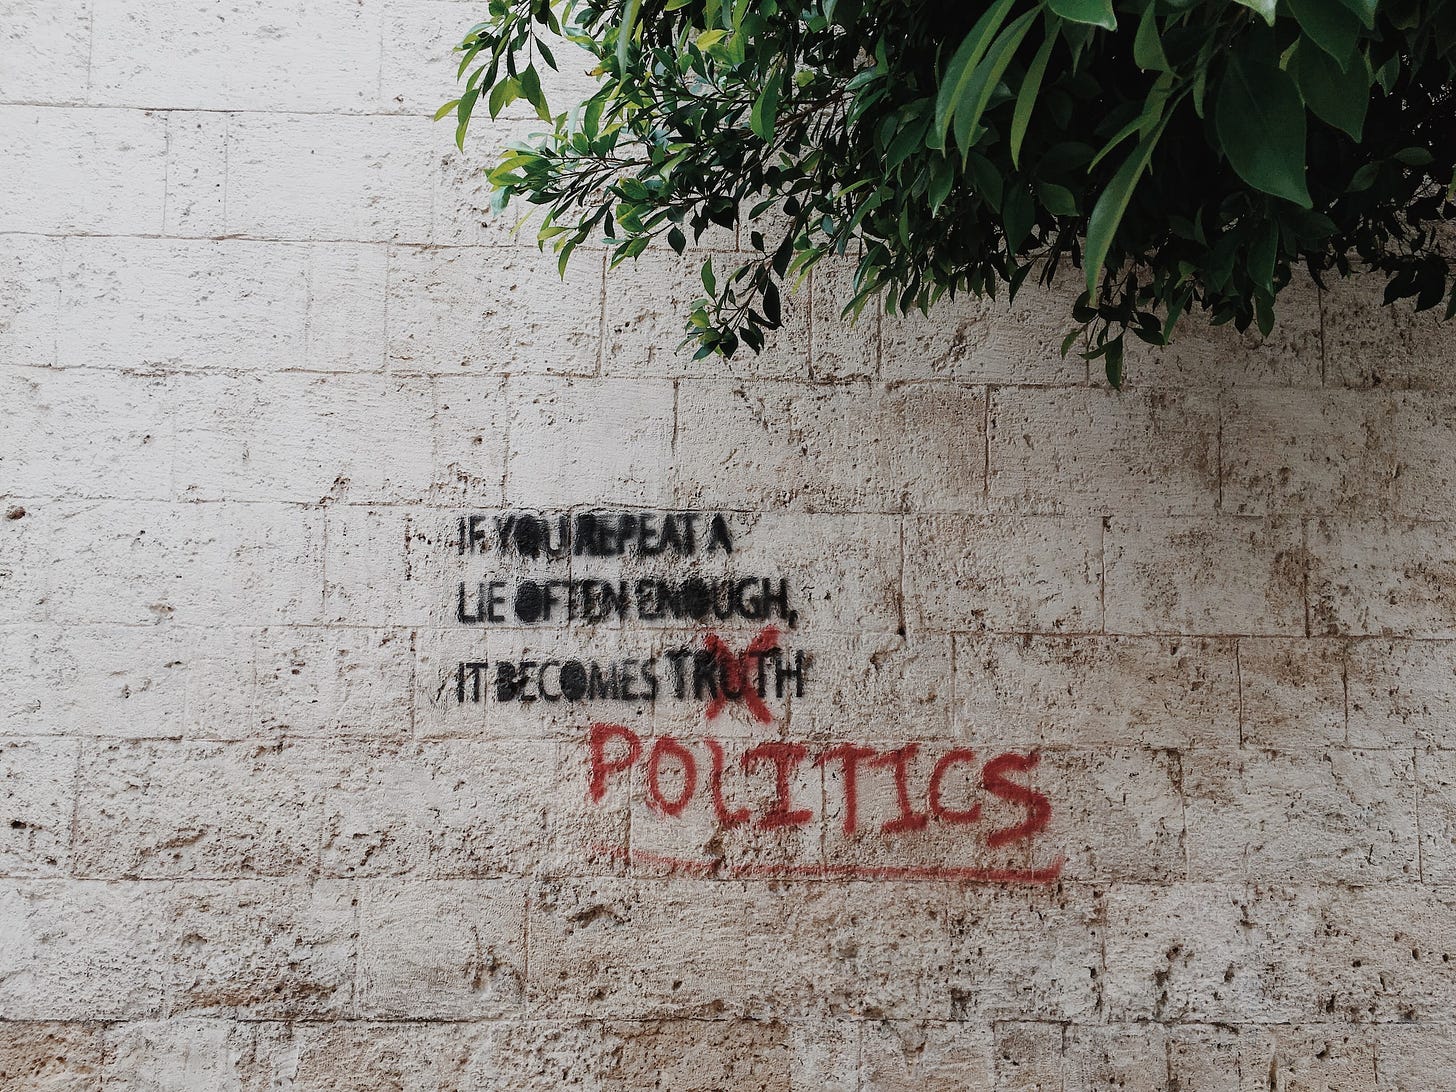 Grafitti on a wall in black paint reads "If you repeat a lie often enough it becomes truth." A red X is marked over the word "truth" and below it is written "politics."